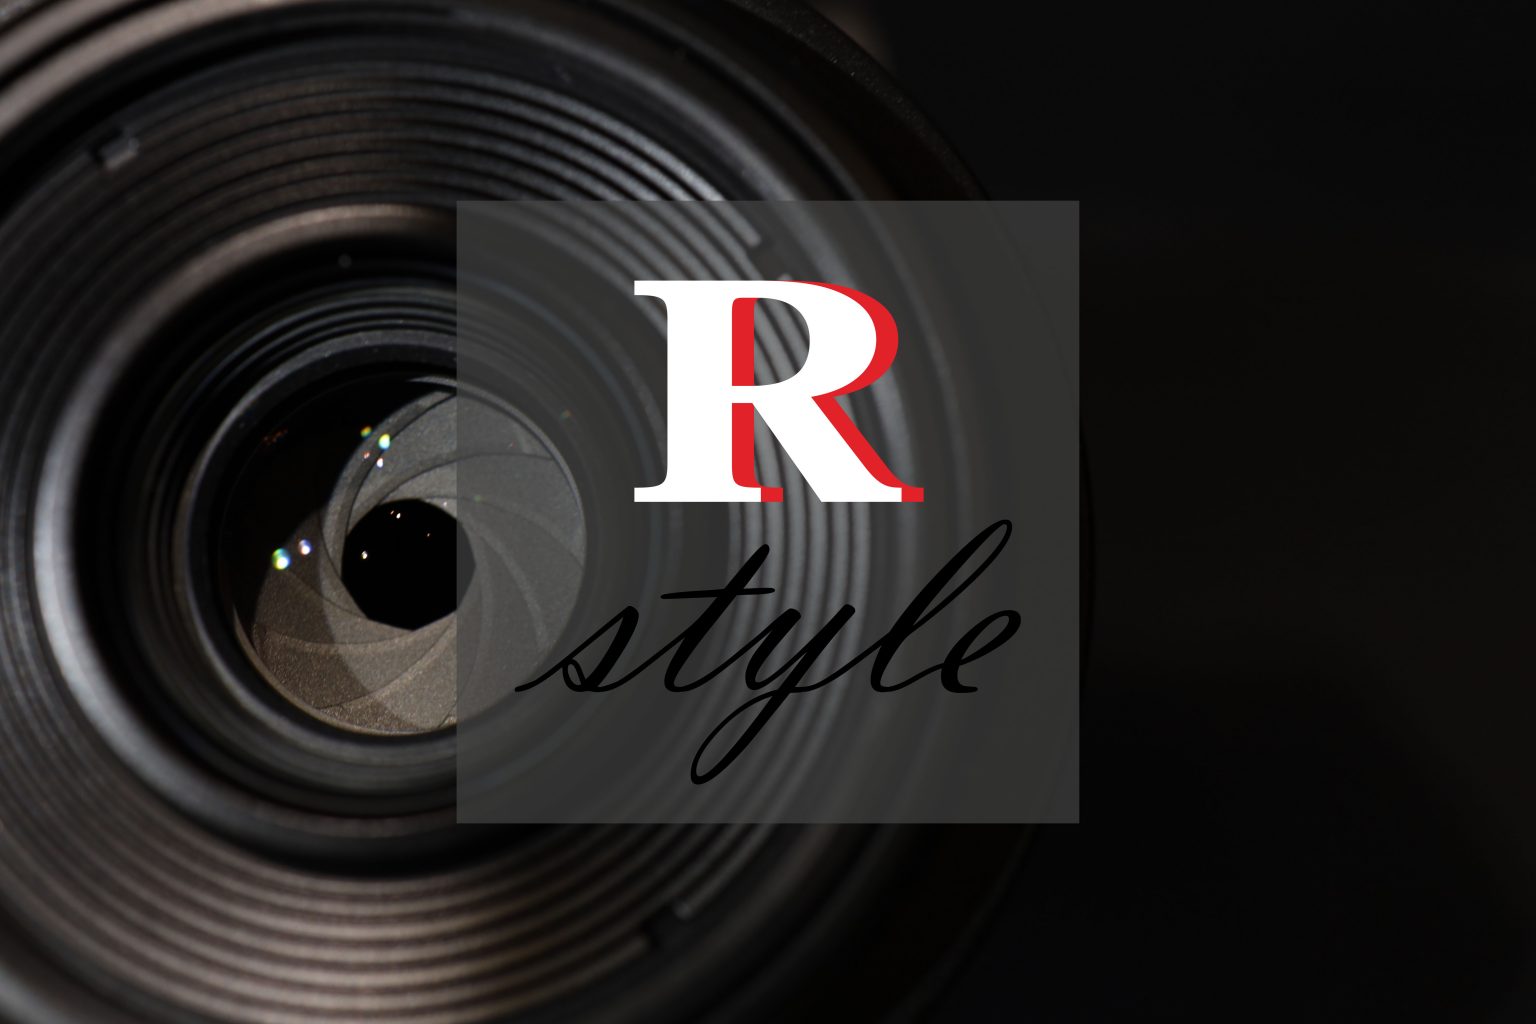 【Canon】R STYLE～RF35mm F1.8 マクロ IS STM～